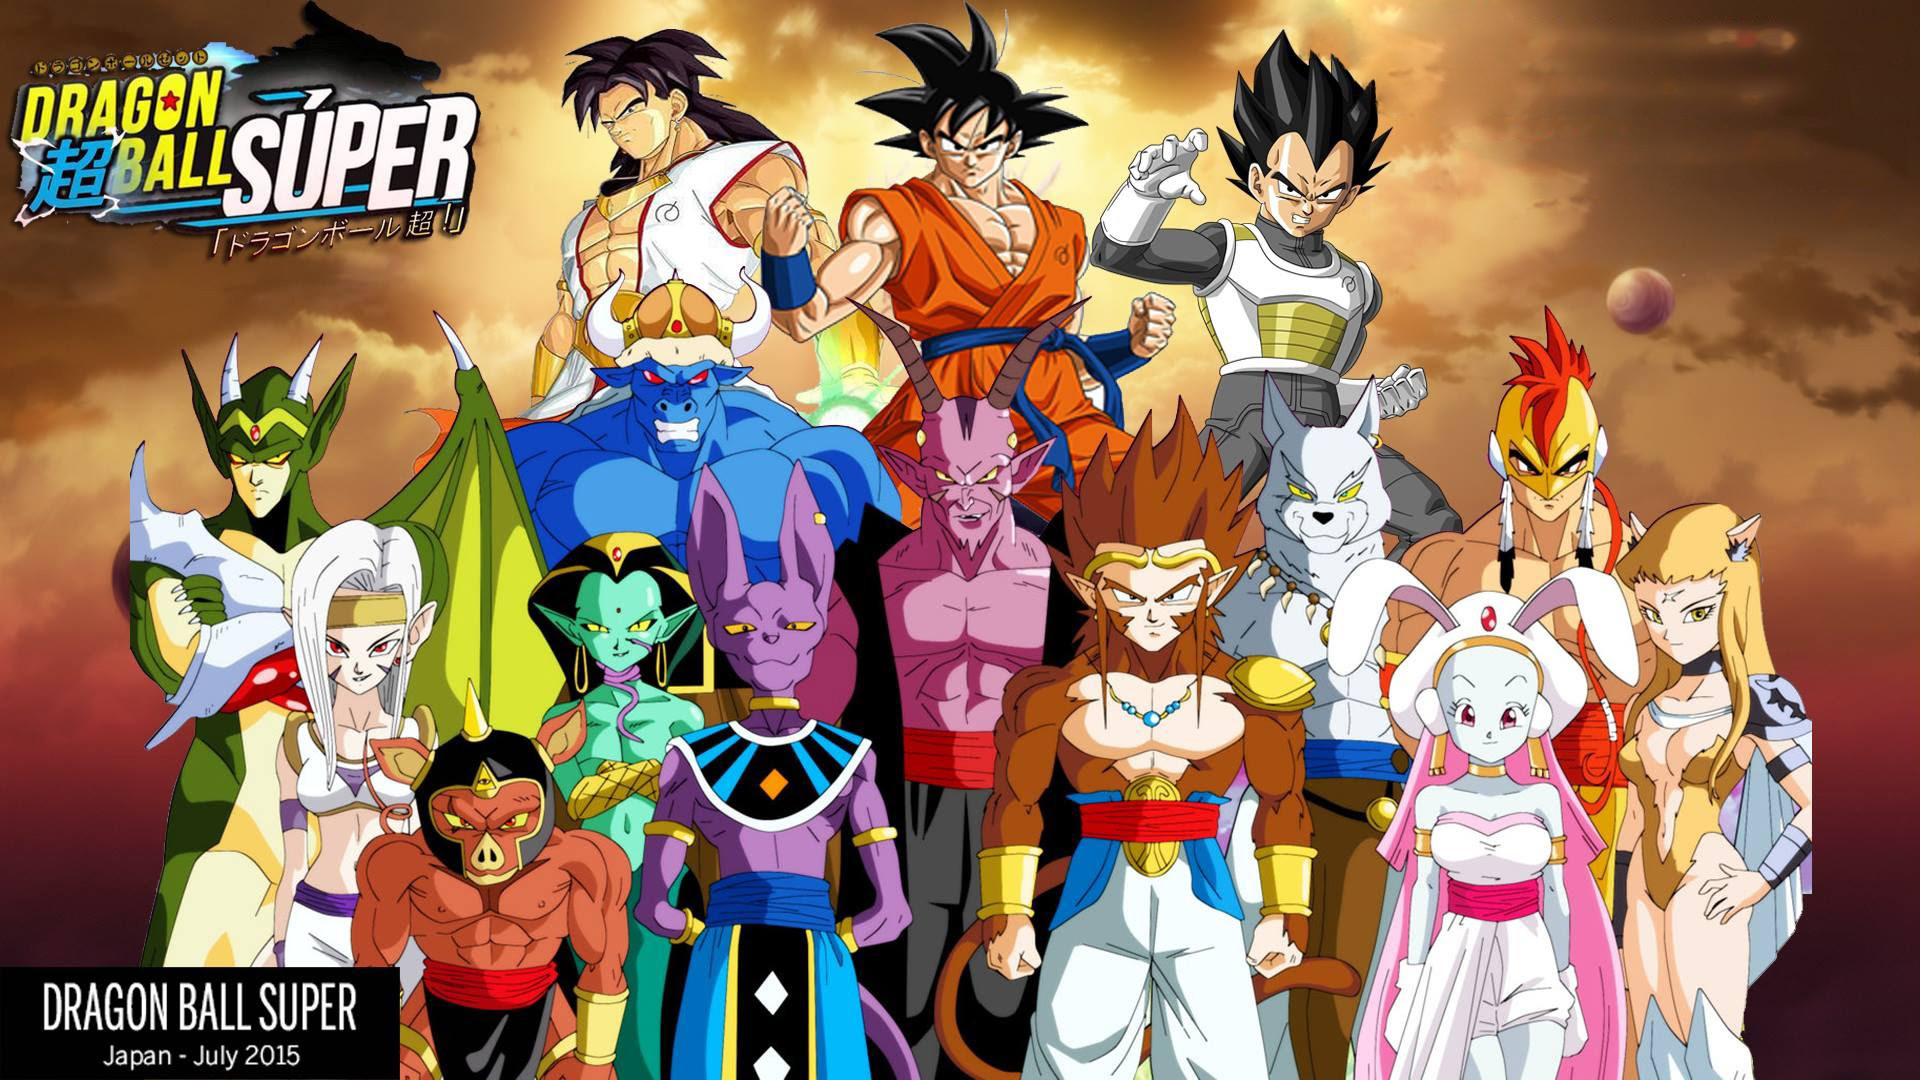 Dragon Ball Super Full HD Wallpaper and Background ID606985